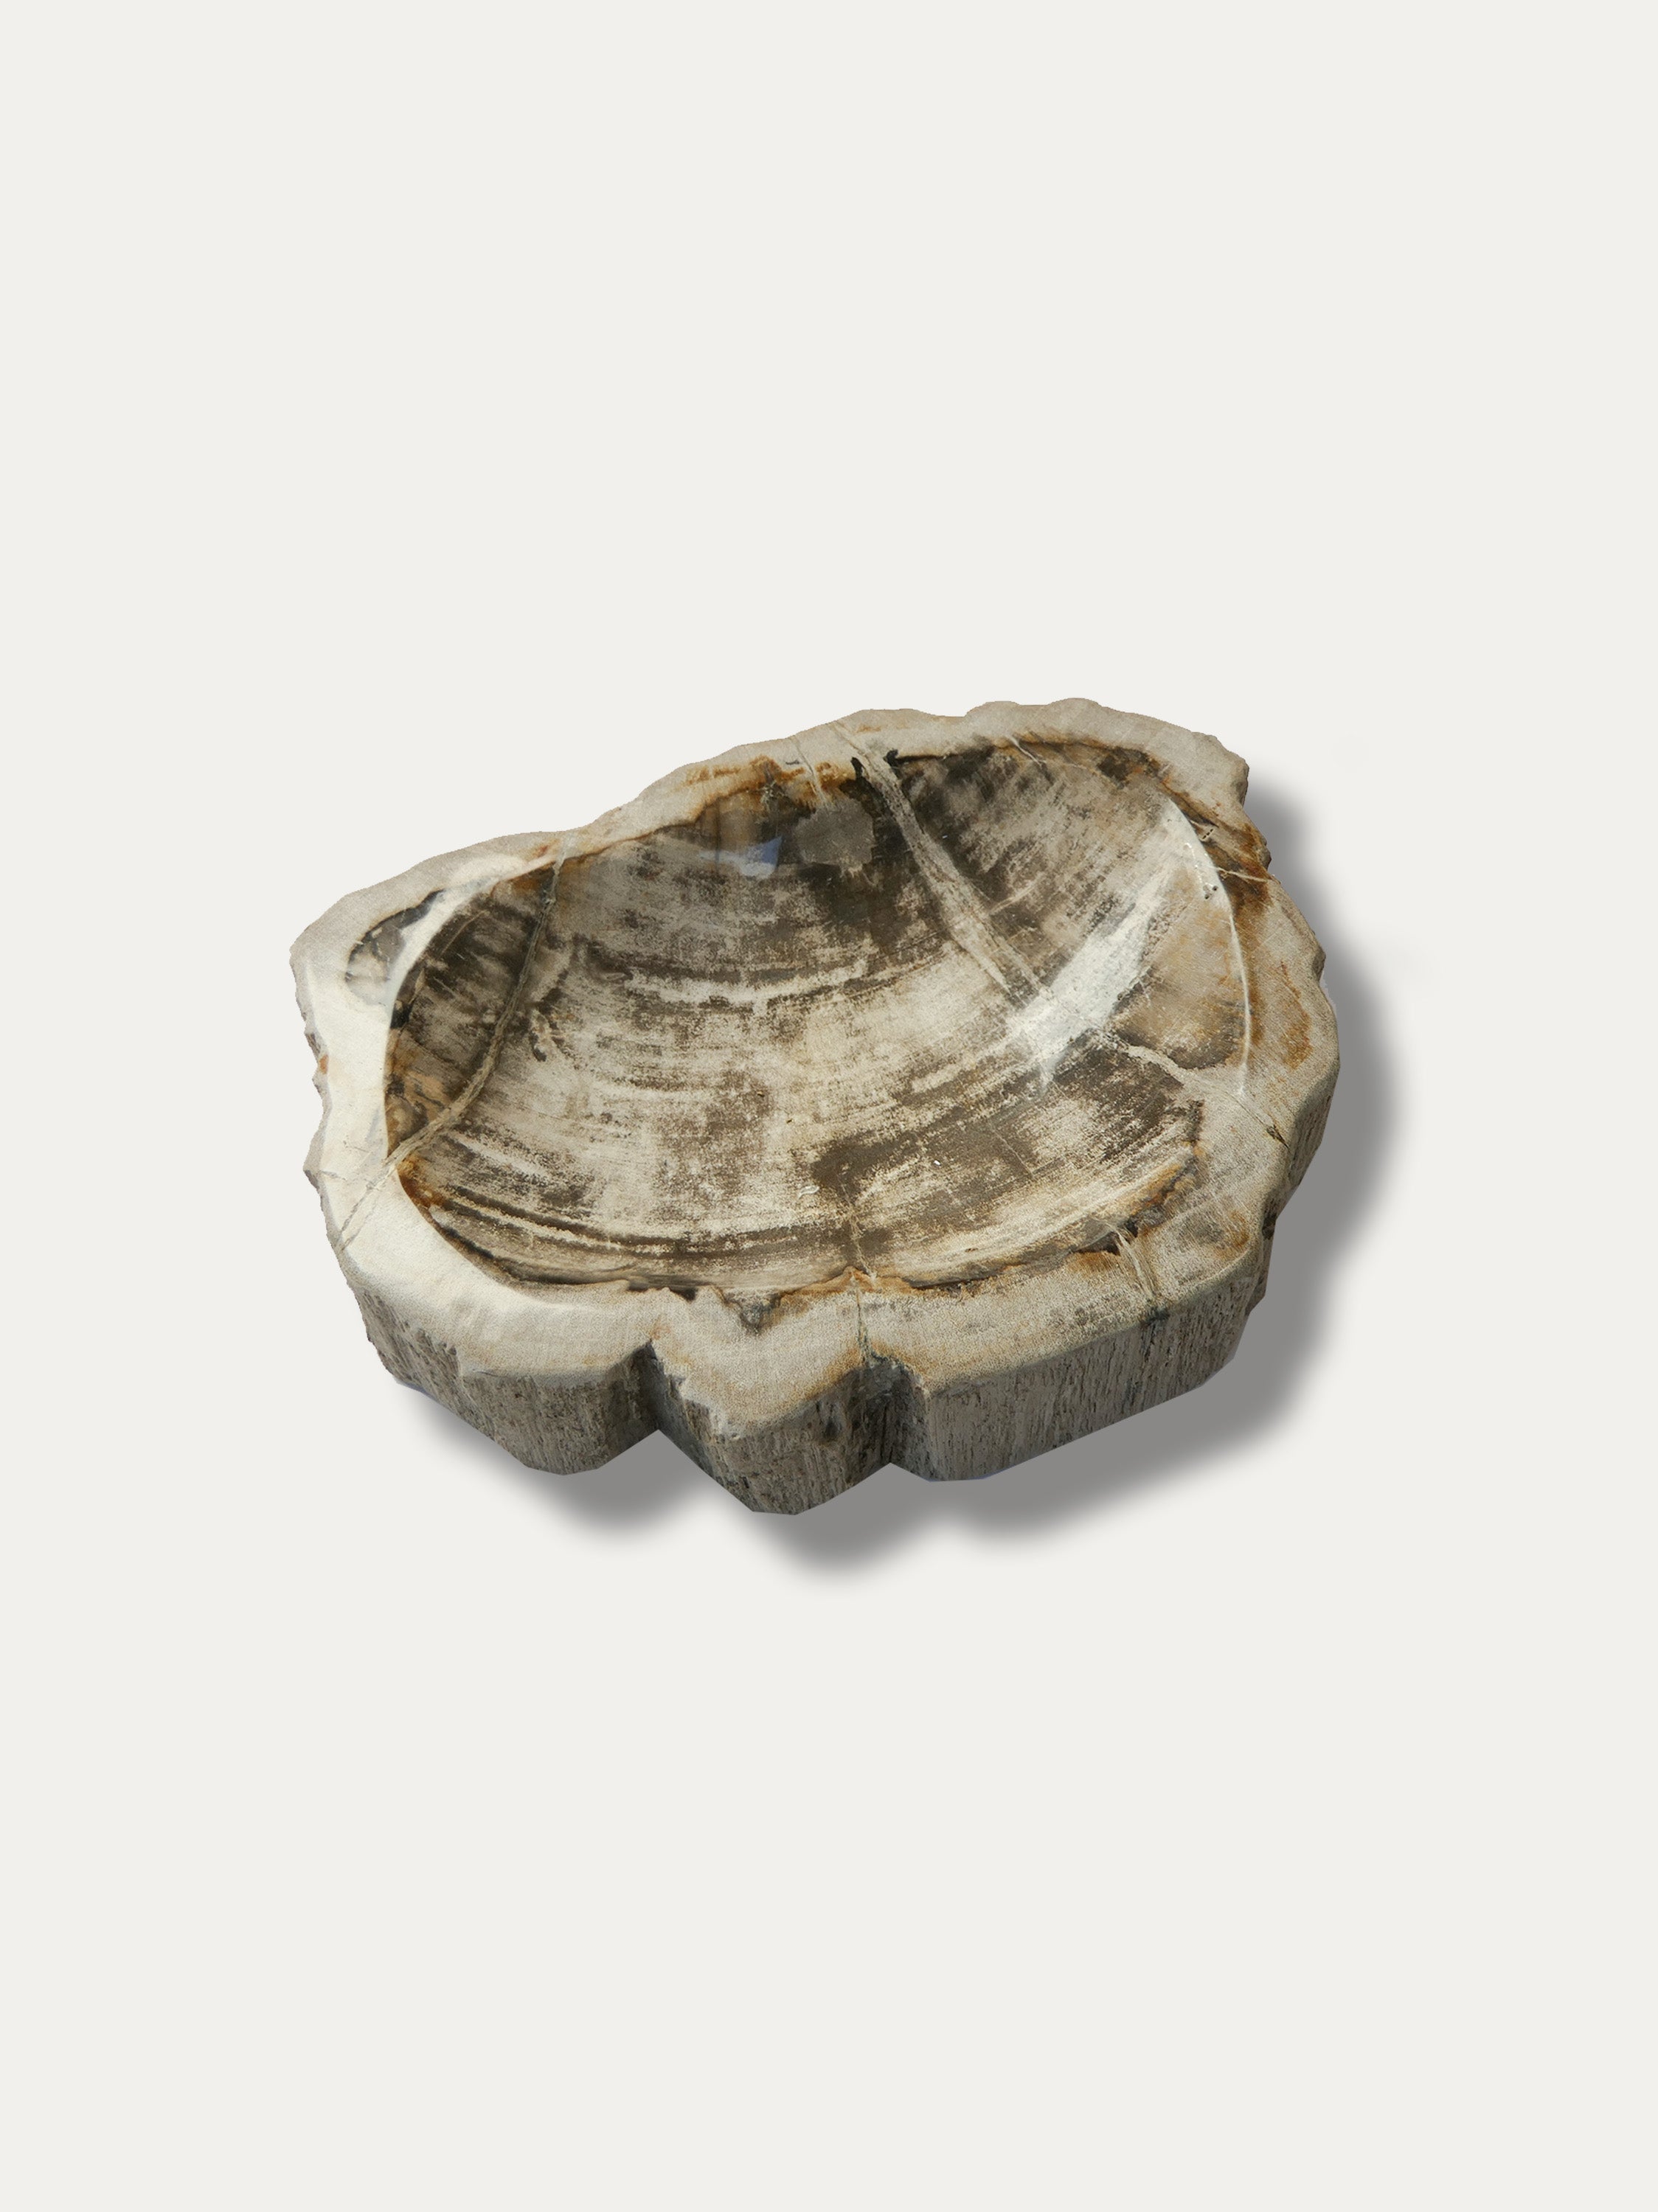 Petrified Wood Bowl  - Enjoy Italy's largest collection of Petrified wood accessories!